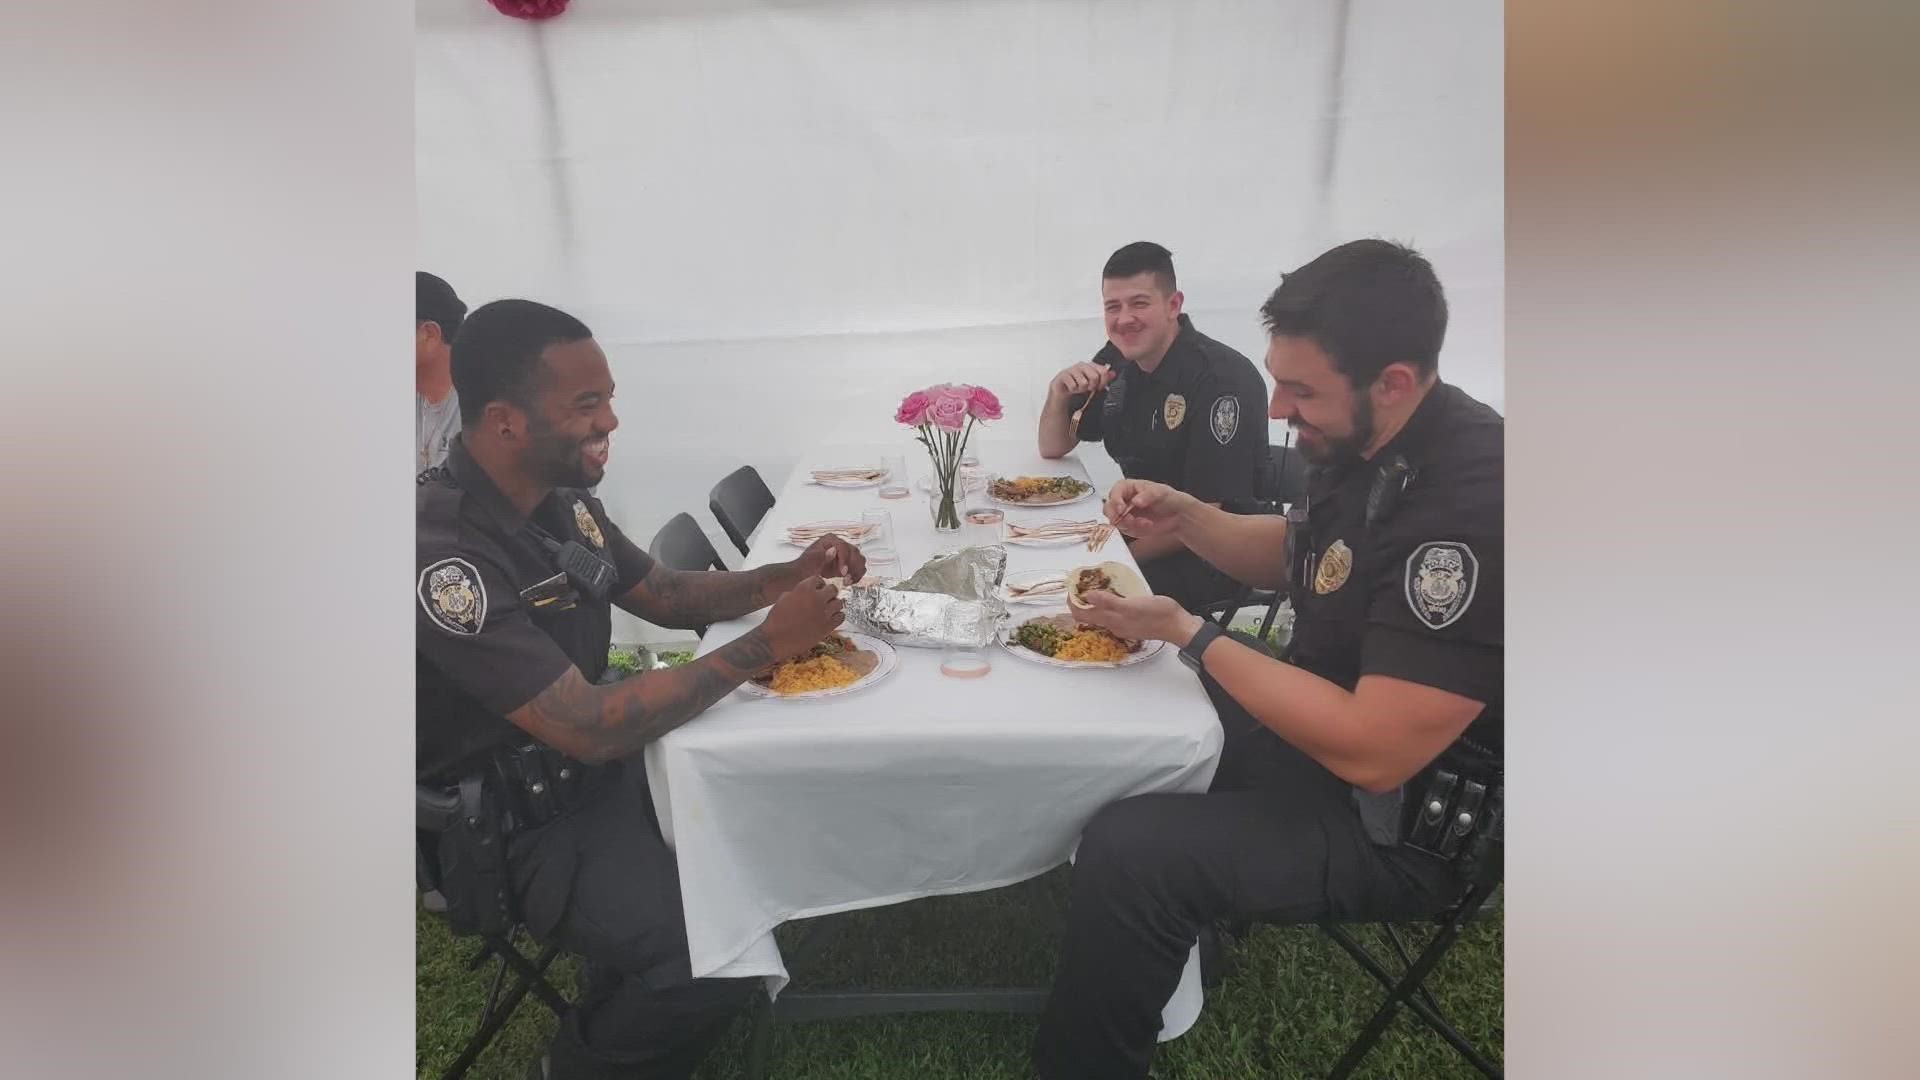 Three Greensboro police officers received a noise complaint for a quinceanera. When they arrived, the family invited them to stay for food and fun.